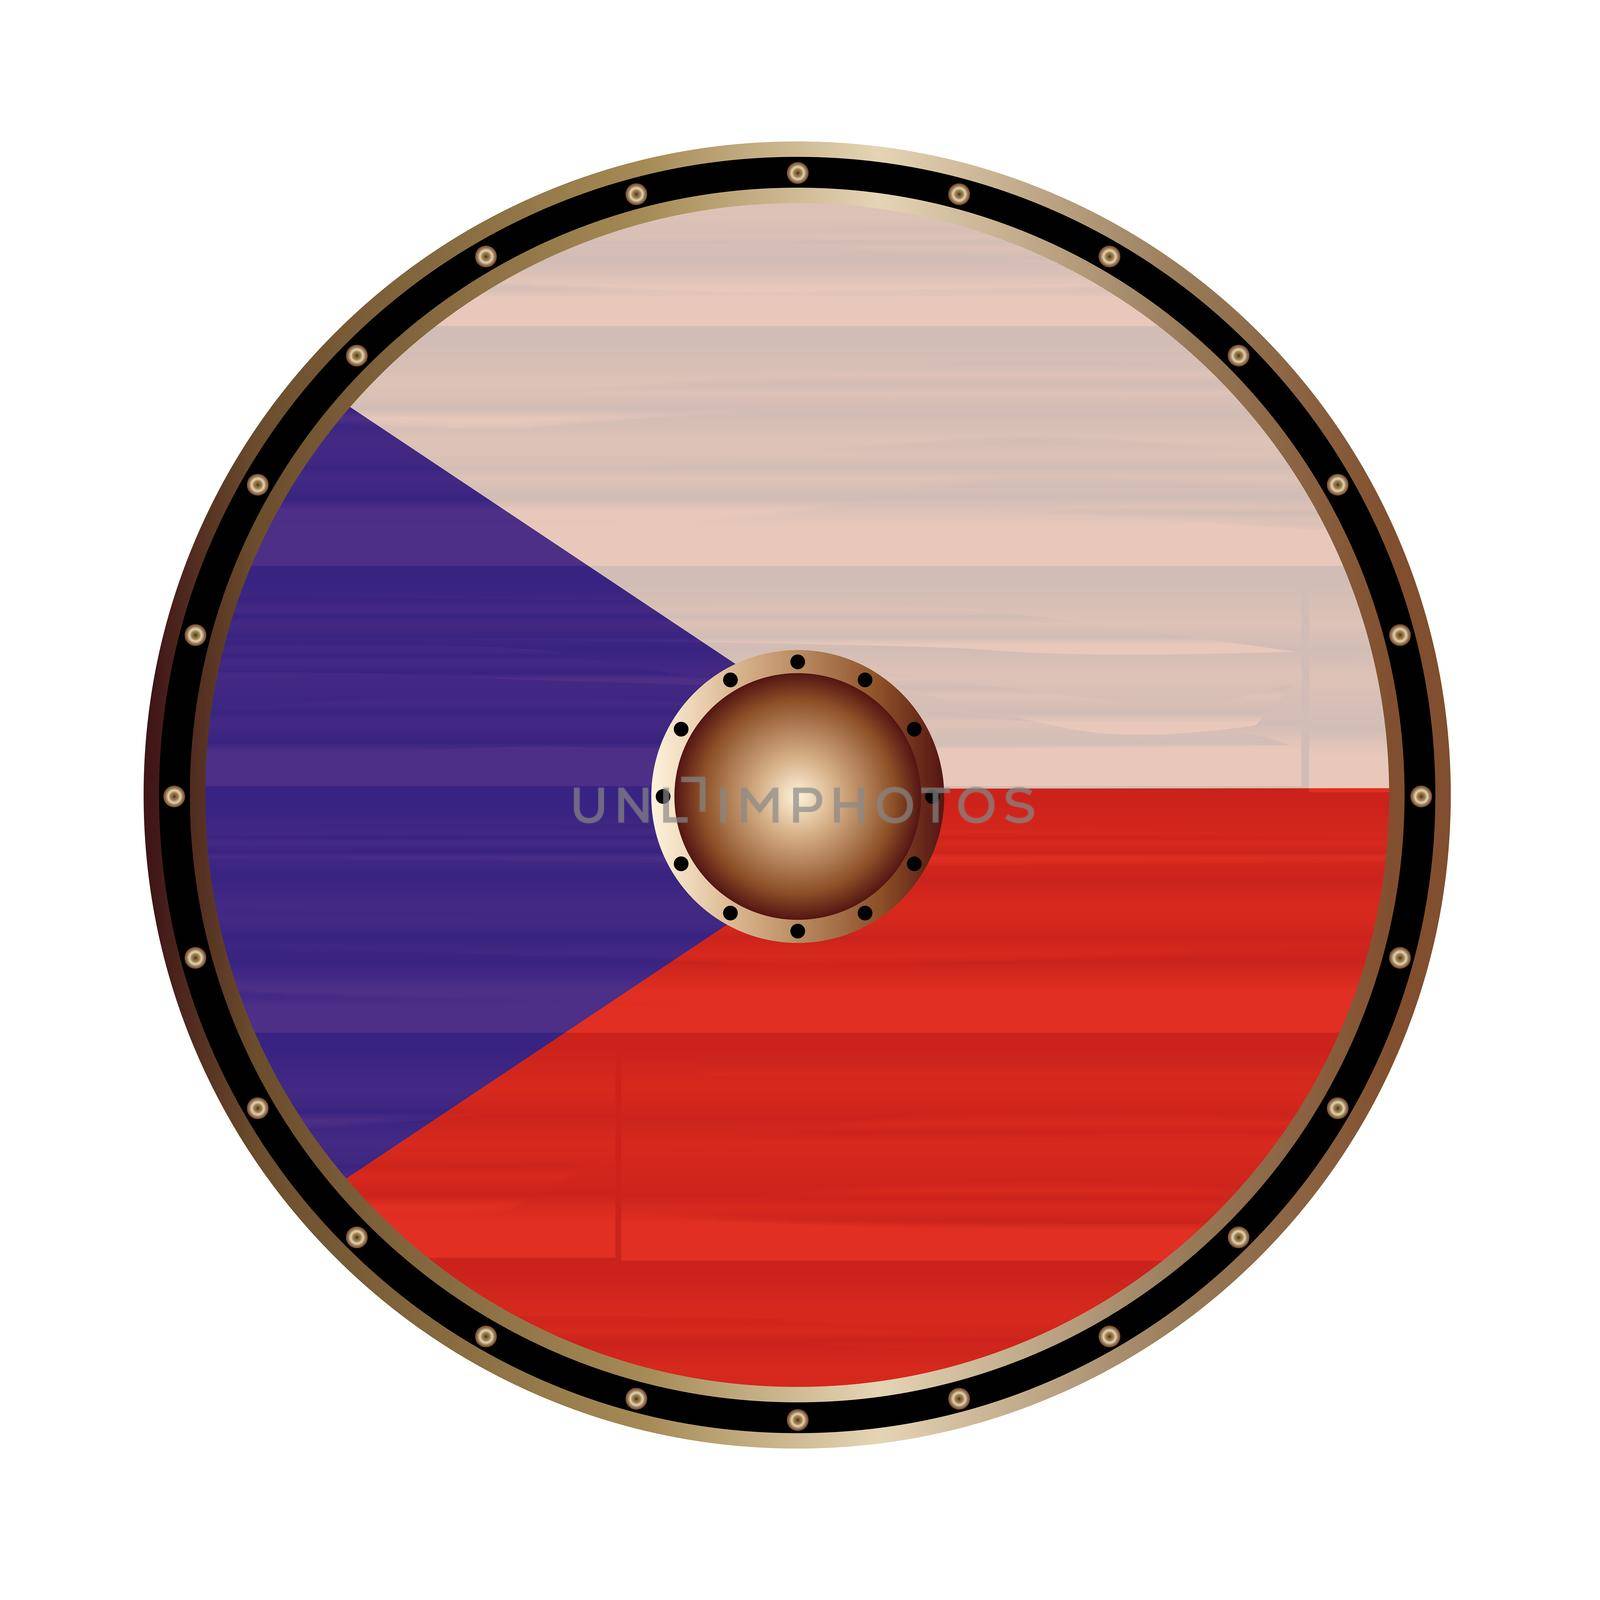 A Viking style round shield with the Czech Republic flag color design isolated on a white background